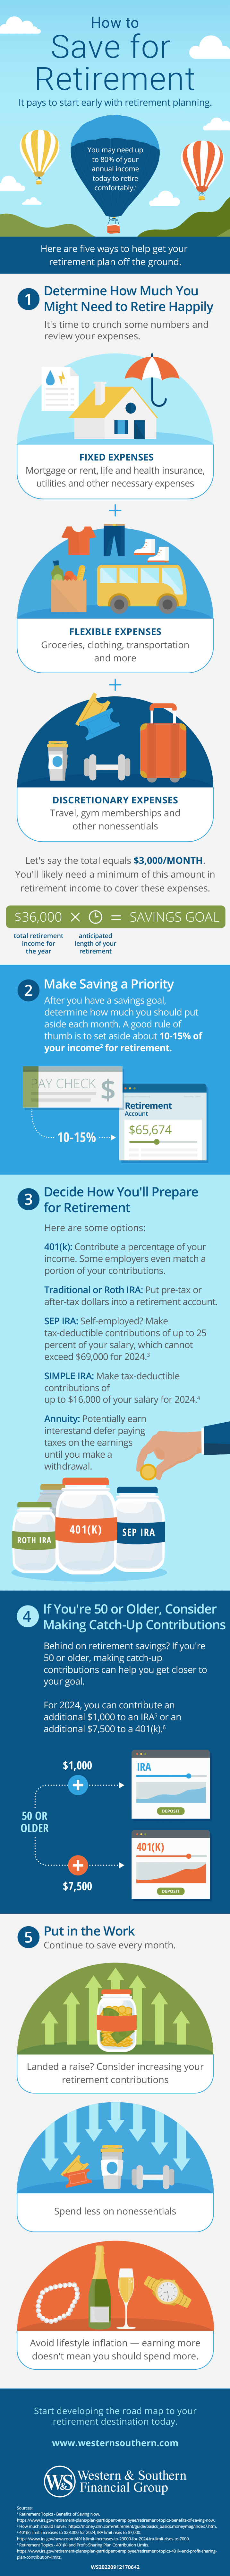 An infographic describing ways to help get your retirement plan off the ground.